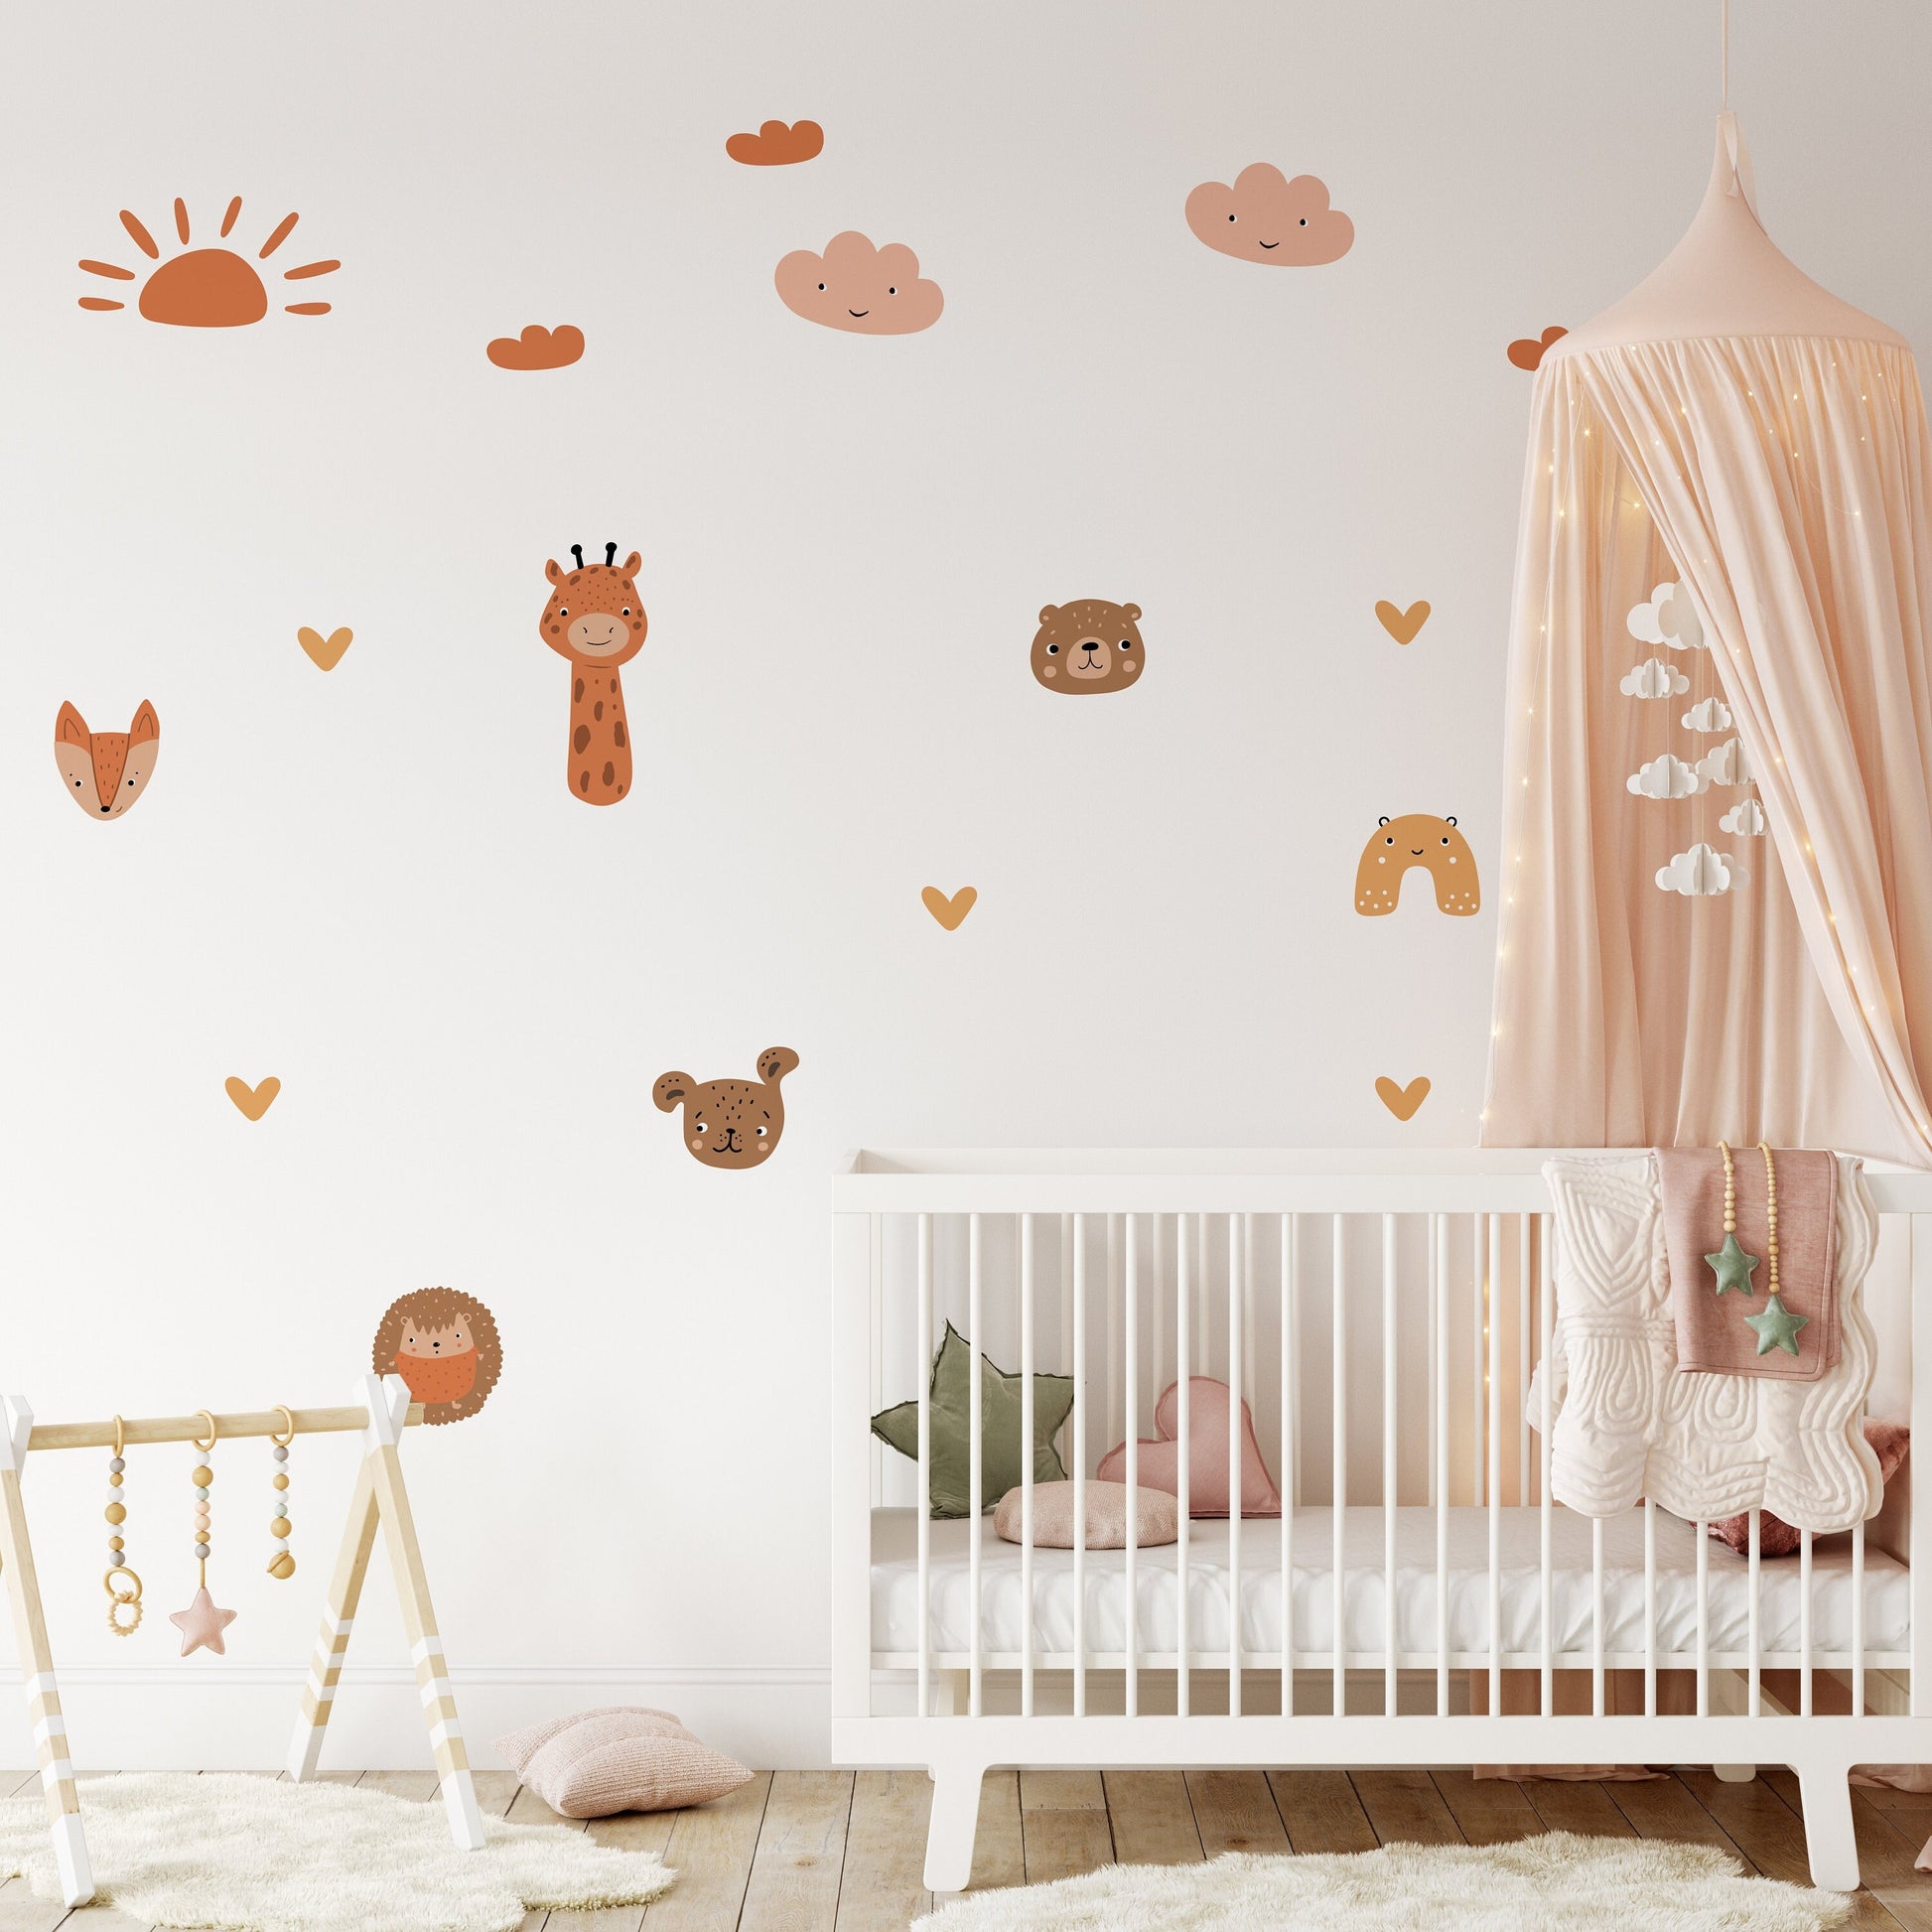 Boho Chic Wall Decor Stickers Decals Animal Chic Nursery Wall Art Kids Childrens Removable Vinyl